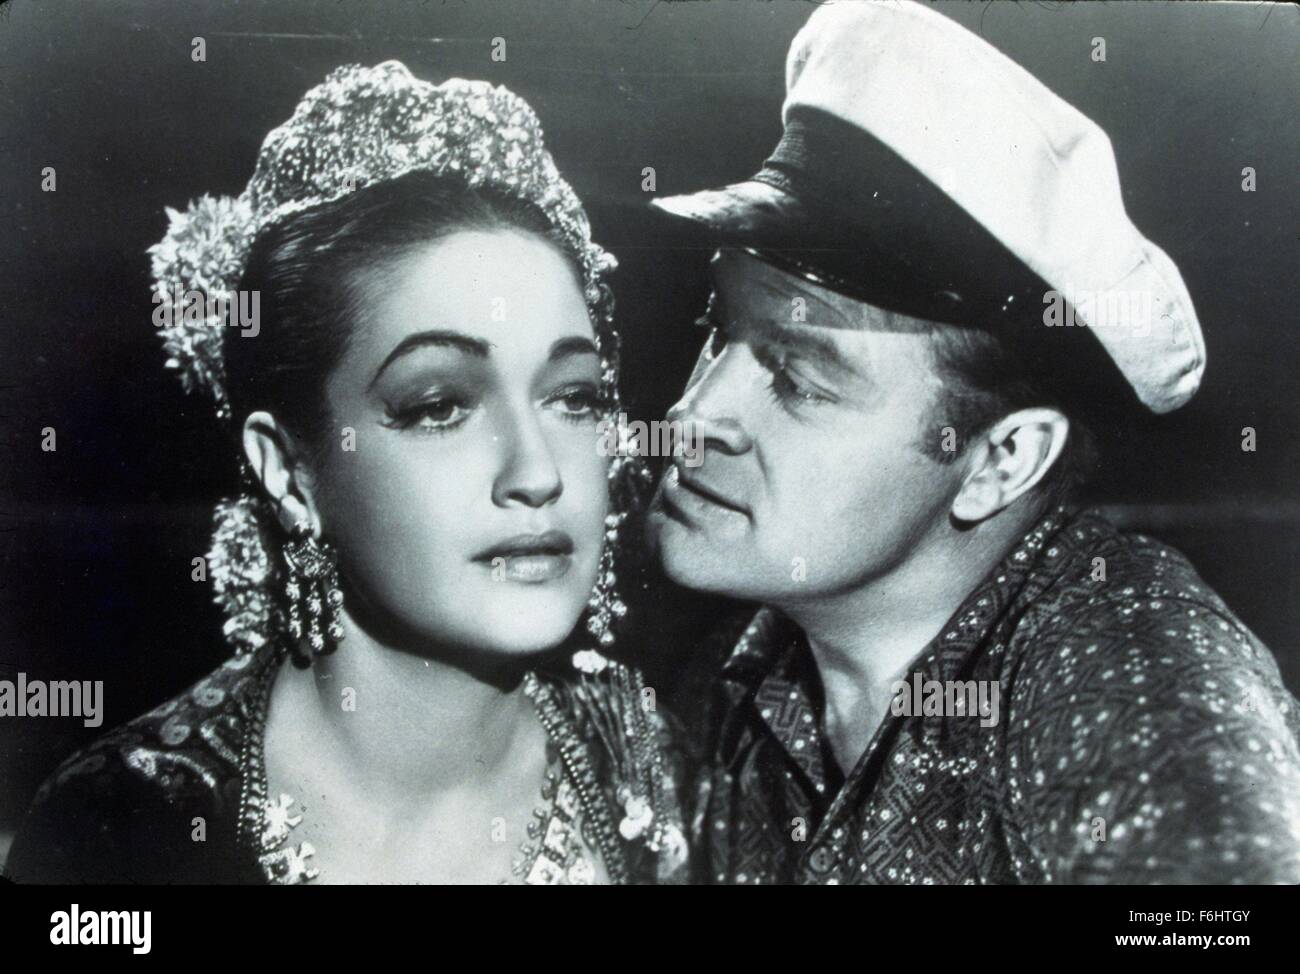 1952, Film Title: ROAD TO BALI, Director: HAL WALKER, Studio: PARAMOUNT, Pictured: BOB HOPE, DOROTHY LAMOUR. (Credit Image: SNAP) Stock Photo